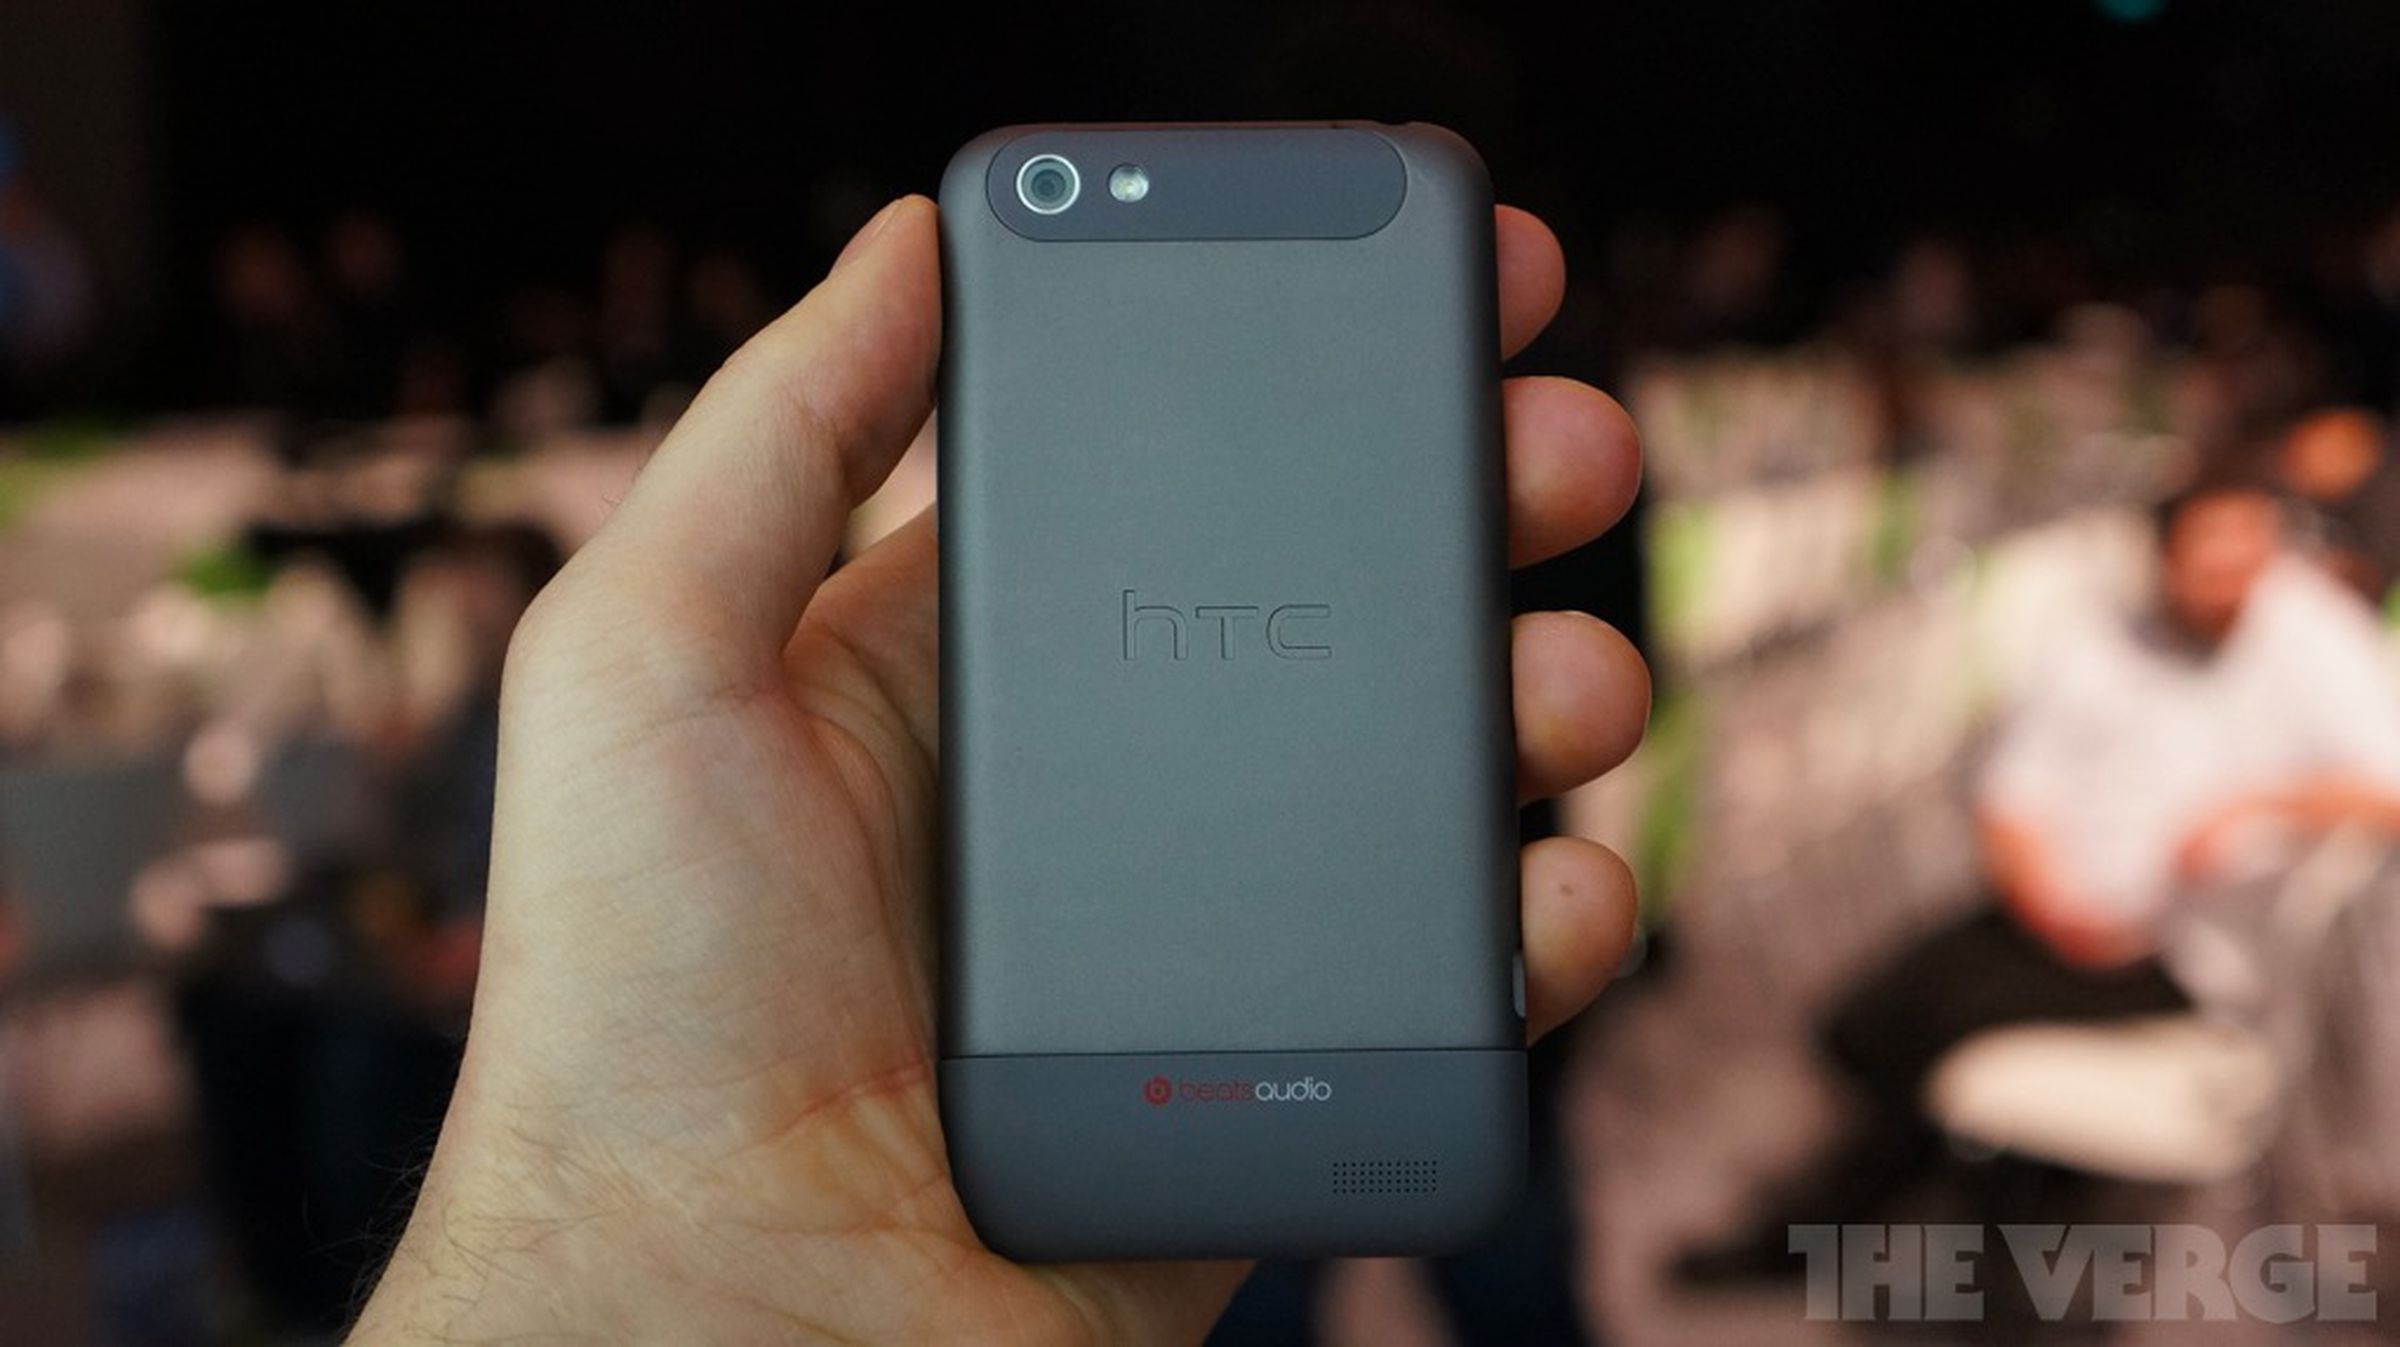 HTC One V hands-on photos